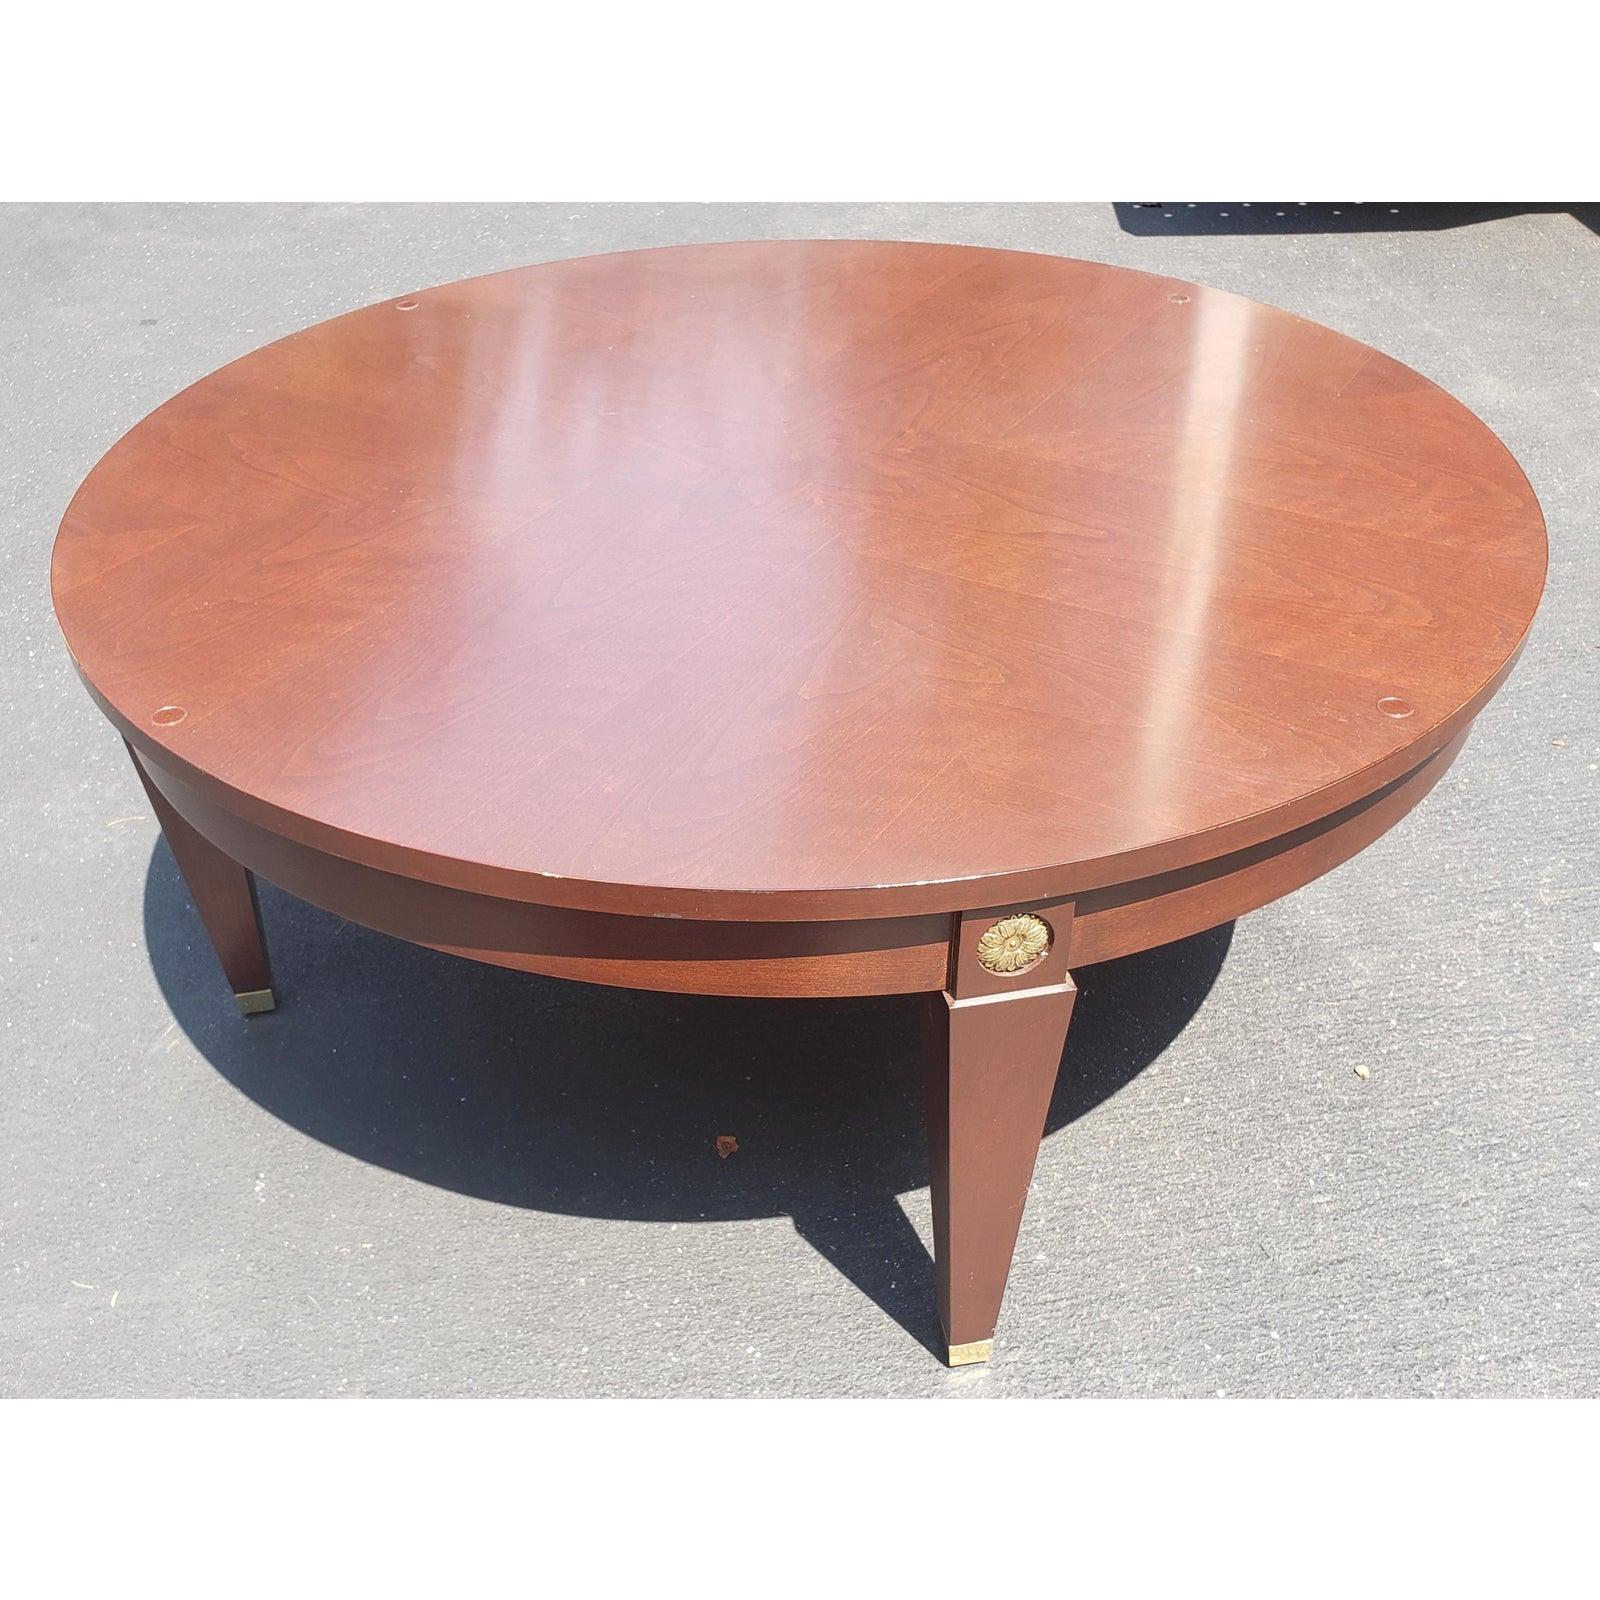 Round mahogany table with custom fitted glass top by Ethan Allen. Brass capped leg with brass medallion on each leg. Excellent condition.
Measures 40